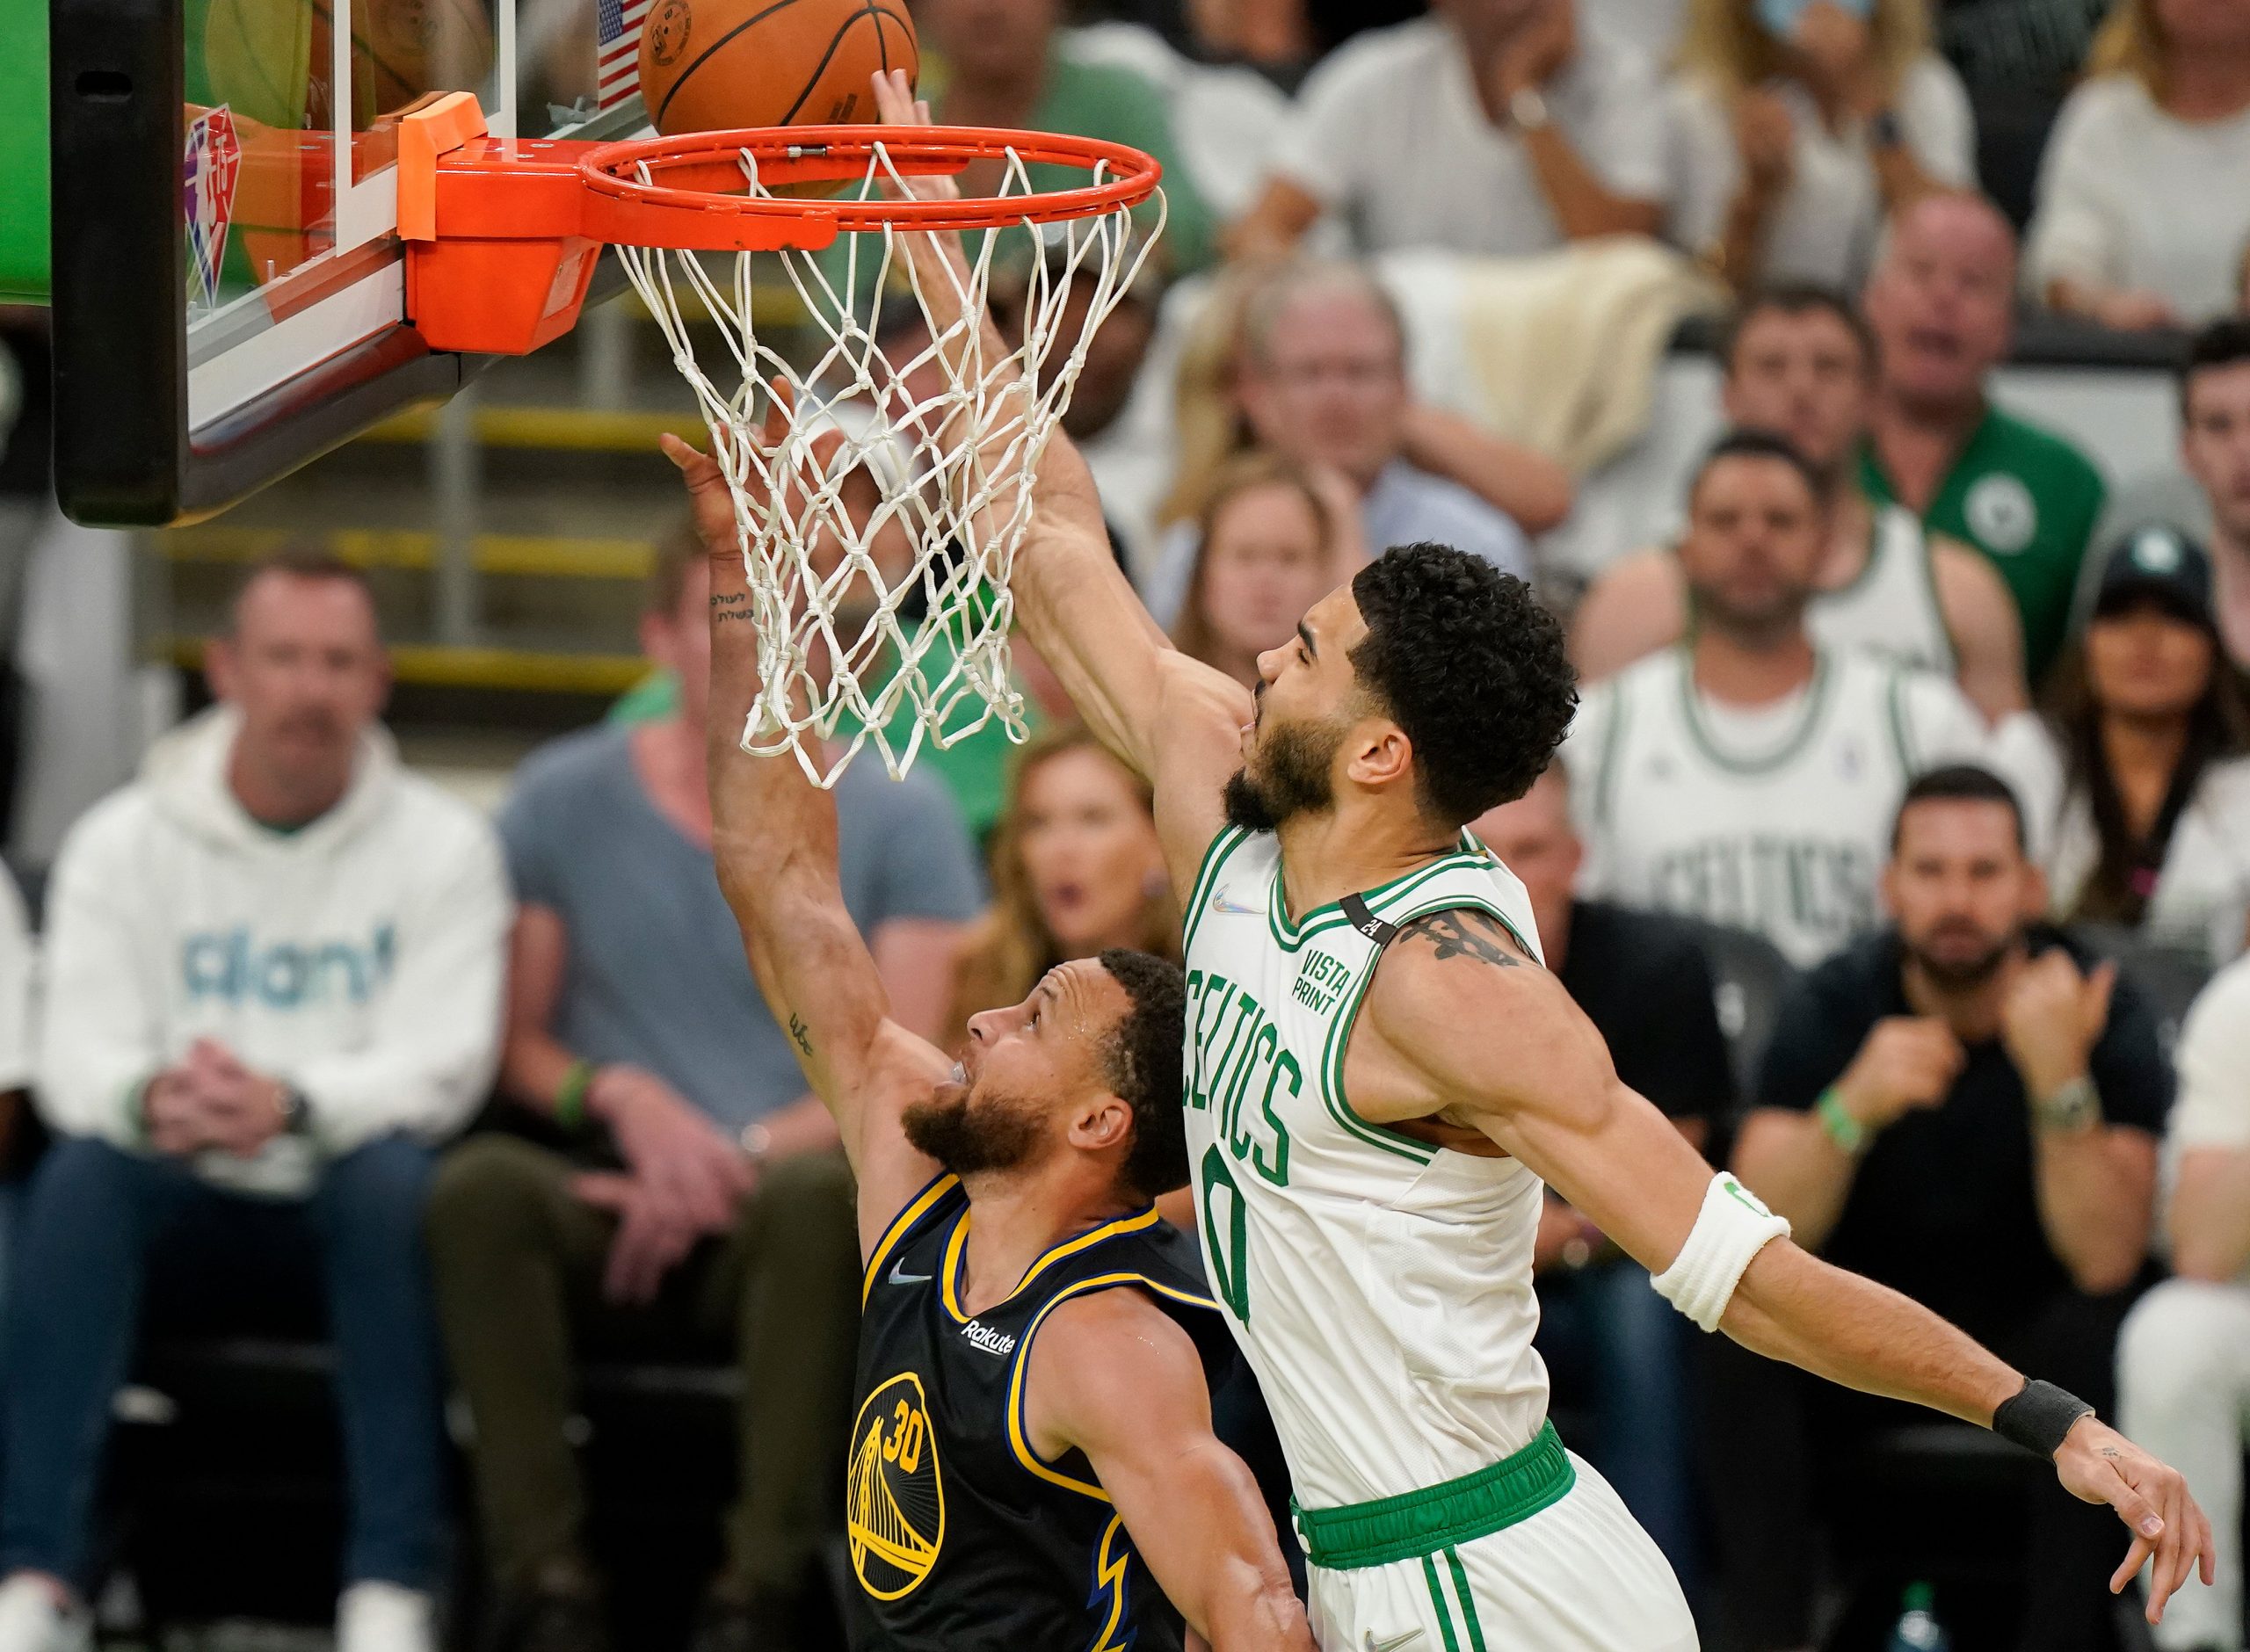 NBA finals: Stephen Curry scores 43 to beat Boston Celtics, Warriors tie with 2-2